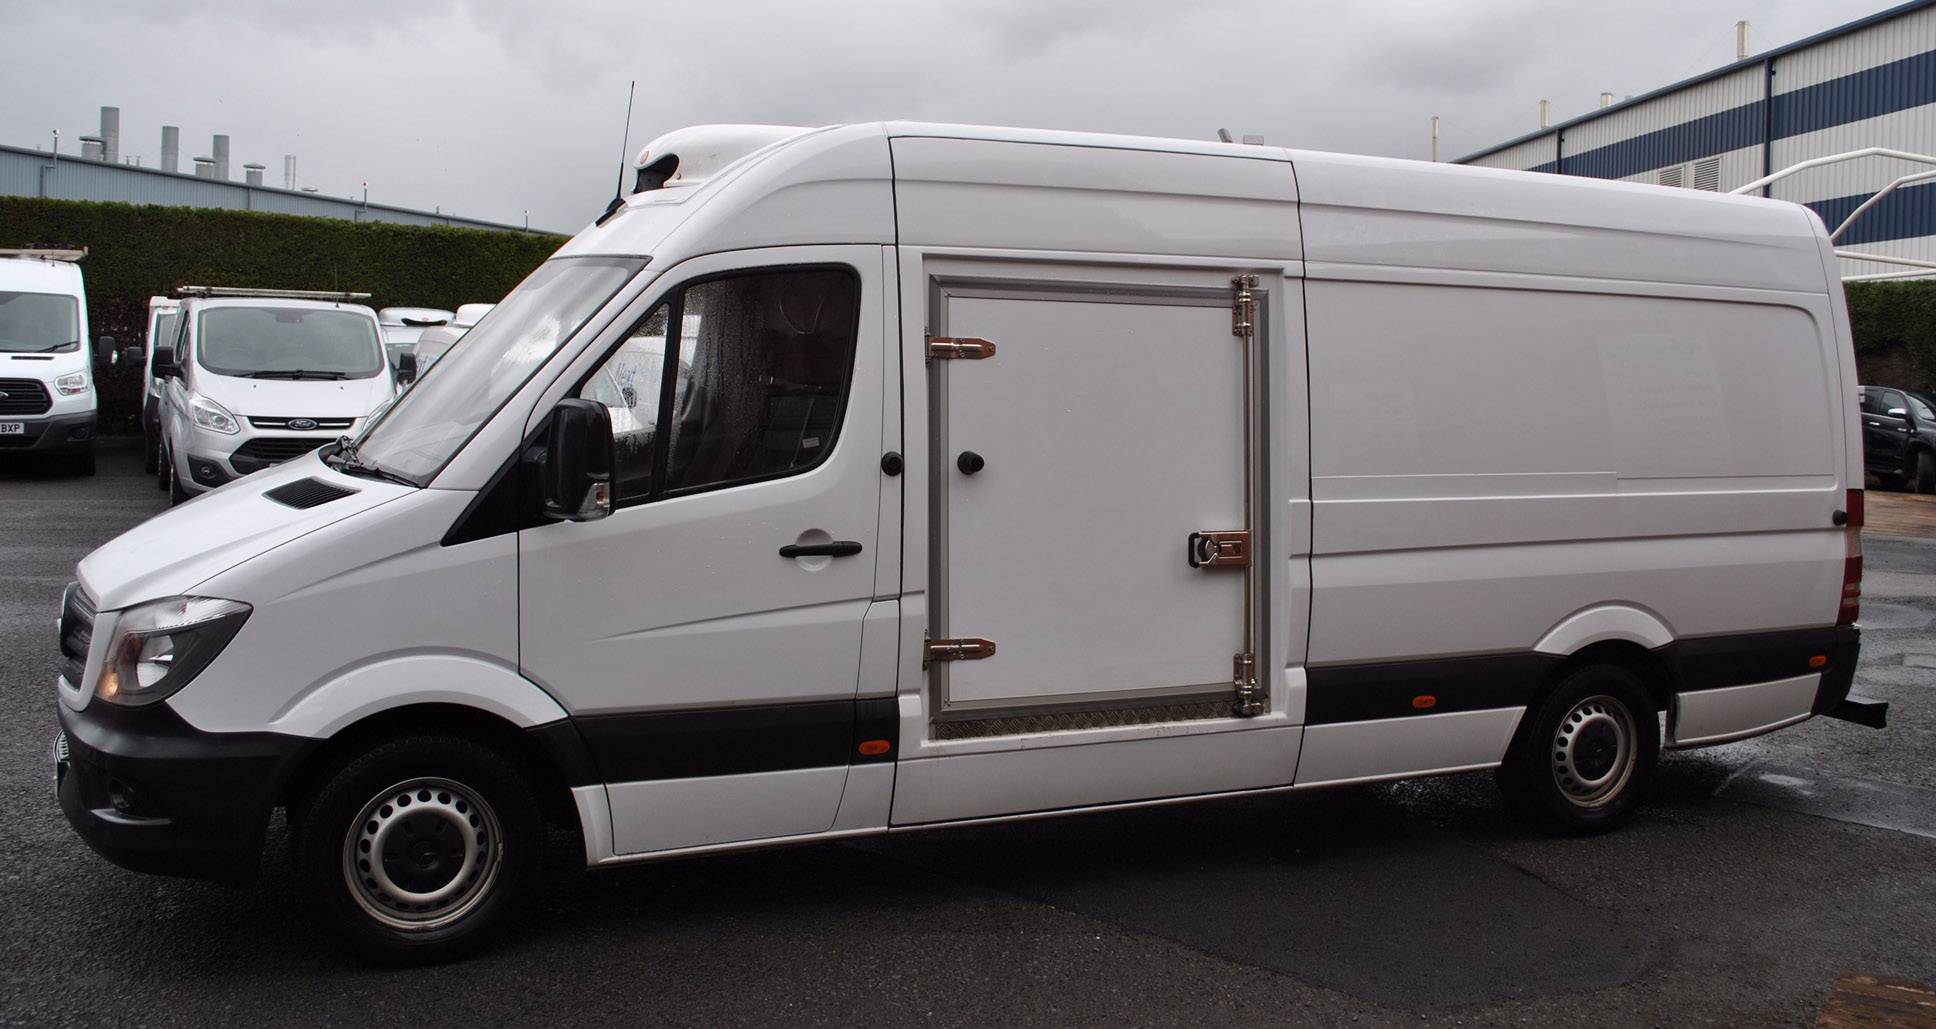 refrigerated van for sale uk